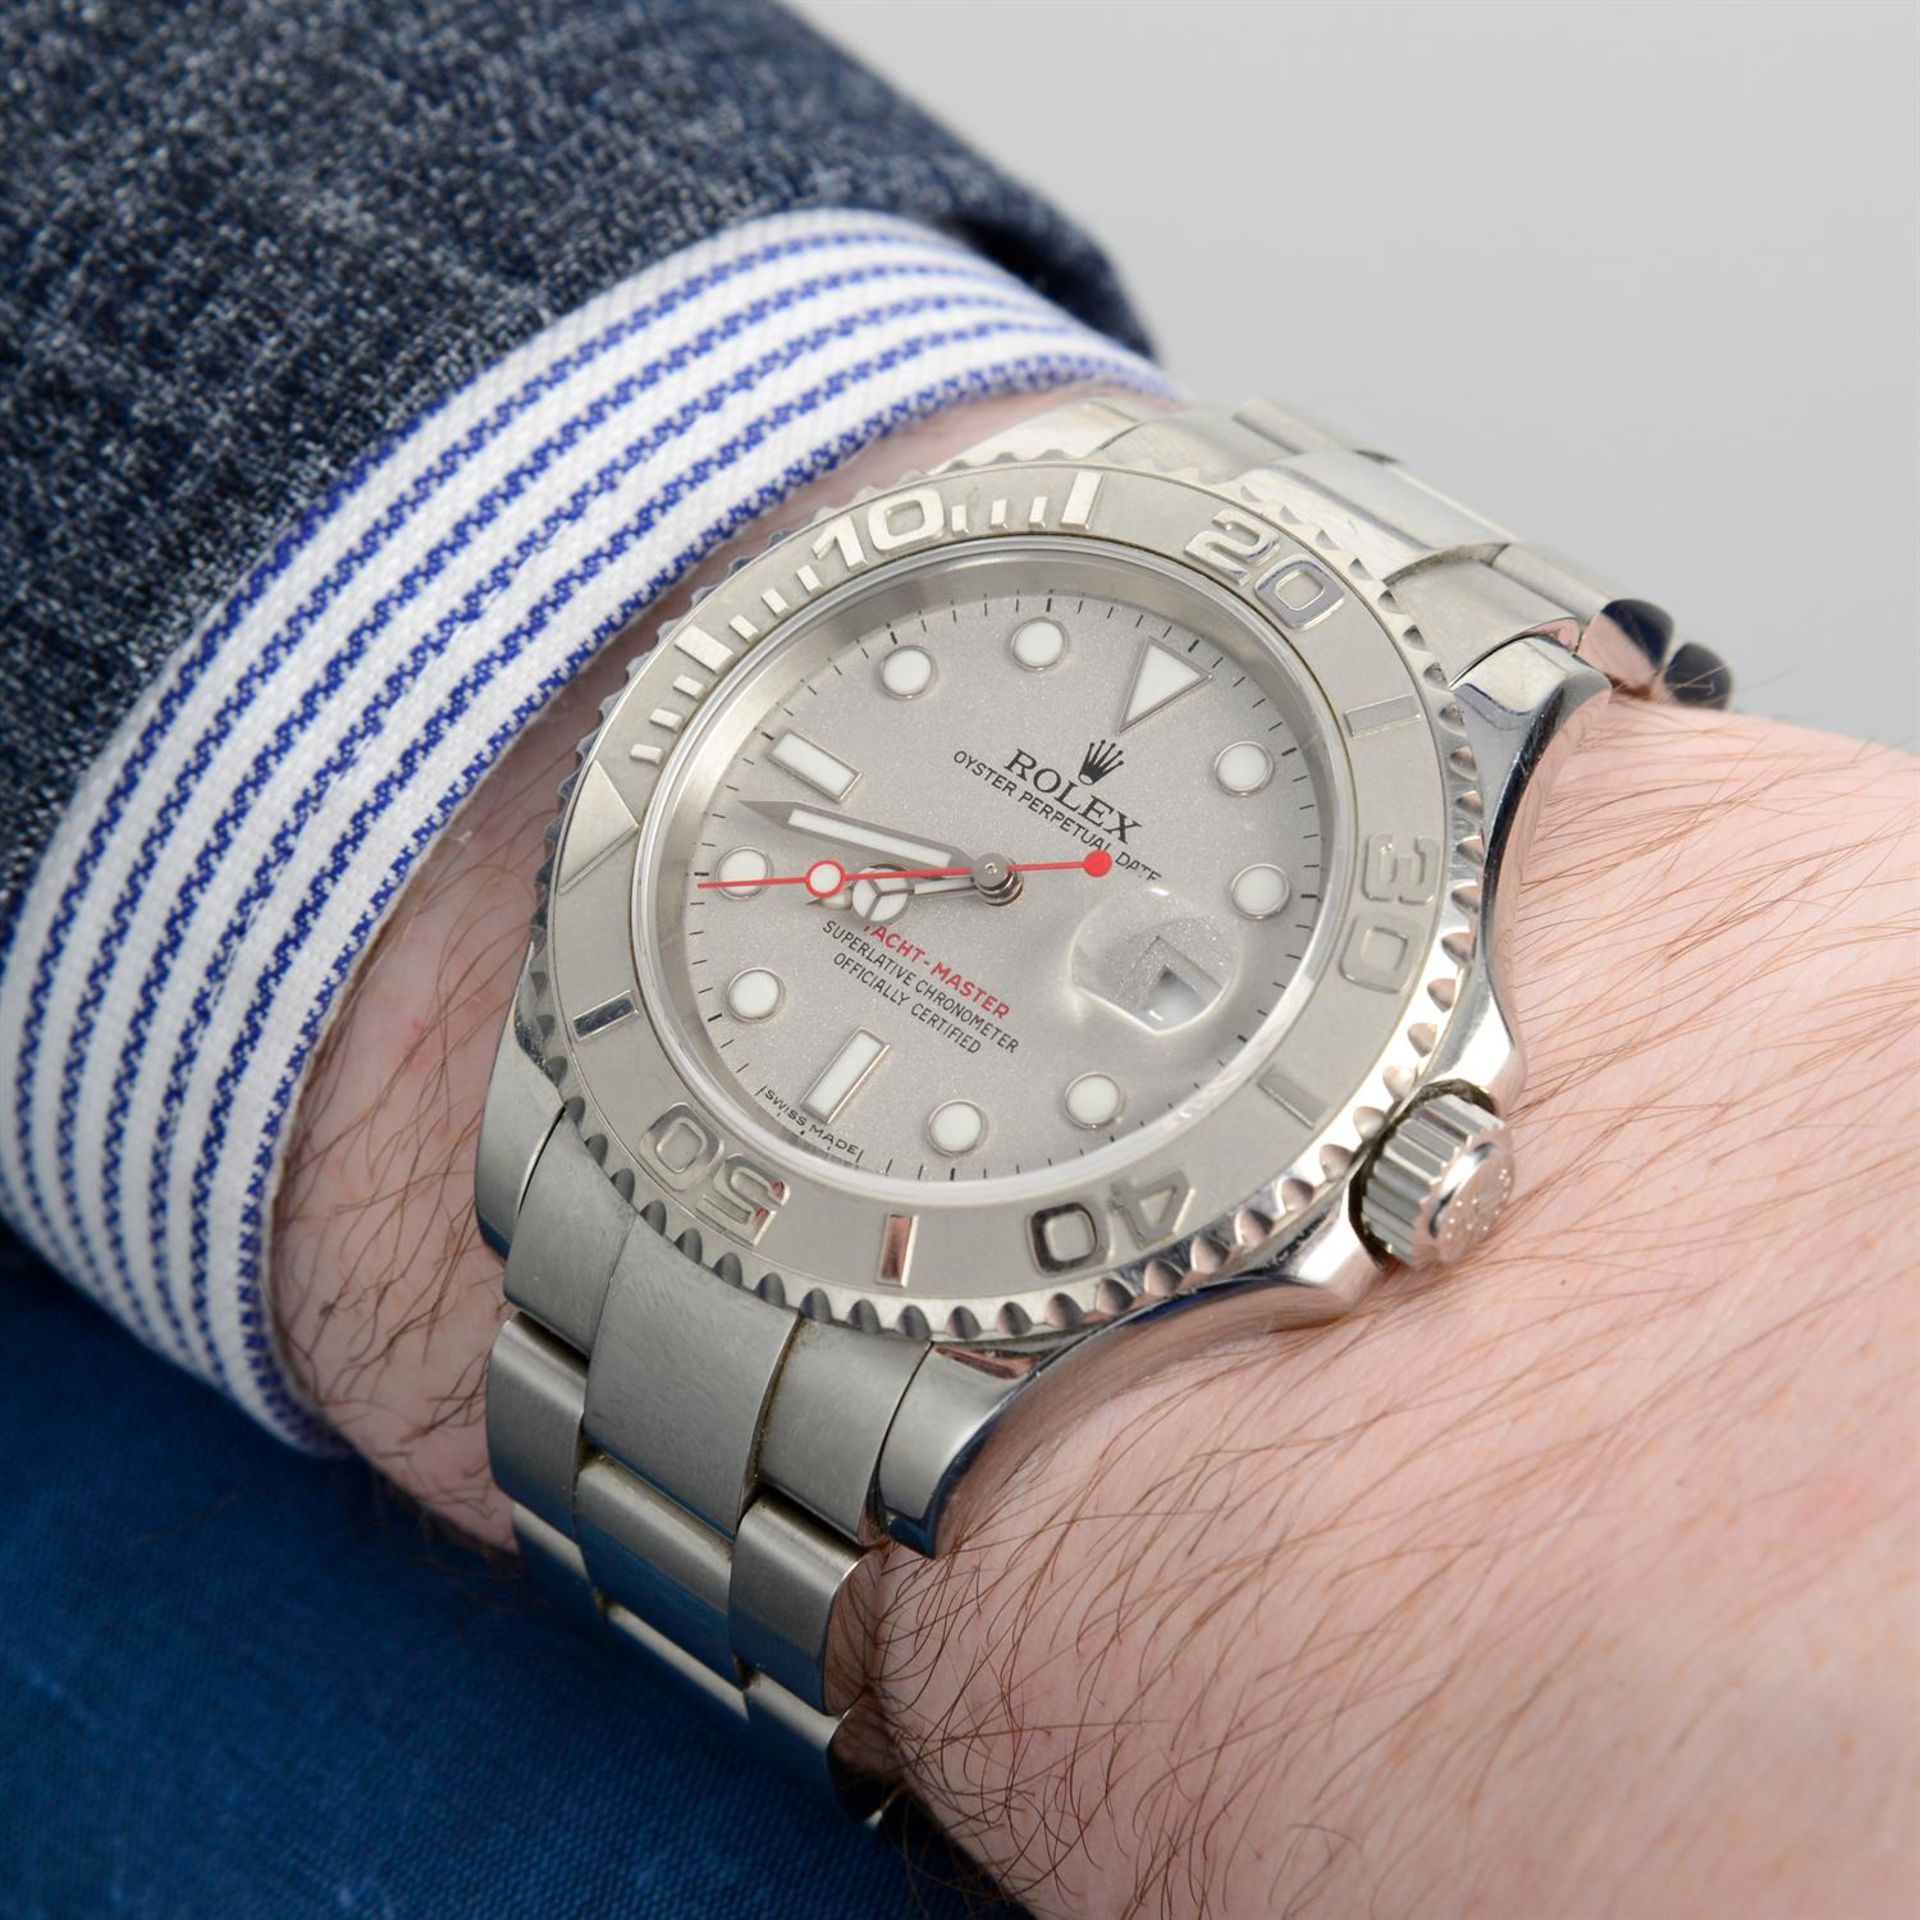 Rolex - an Oyster Perpetual Yacht-Master watch, 41mm. - Image 6 of 7